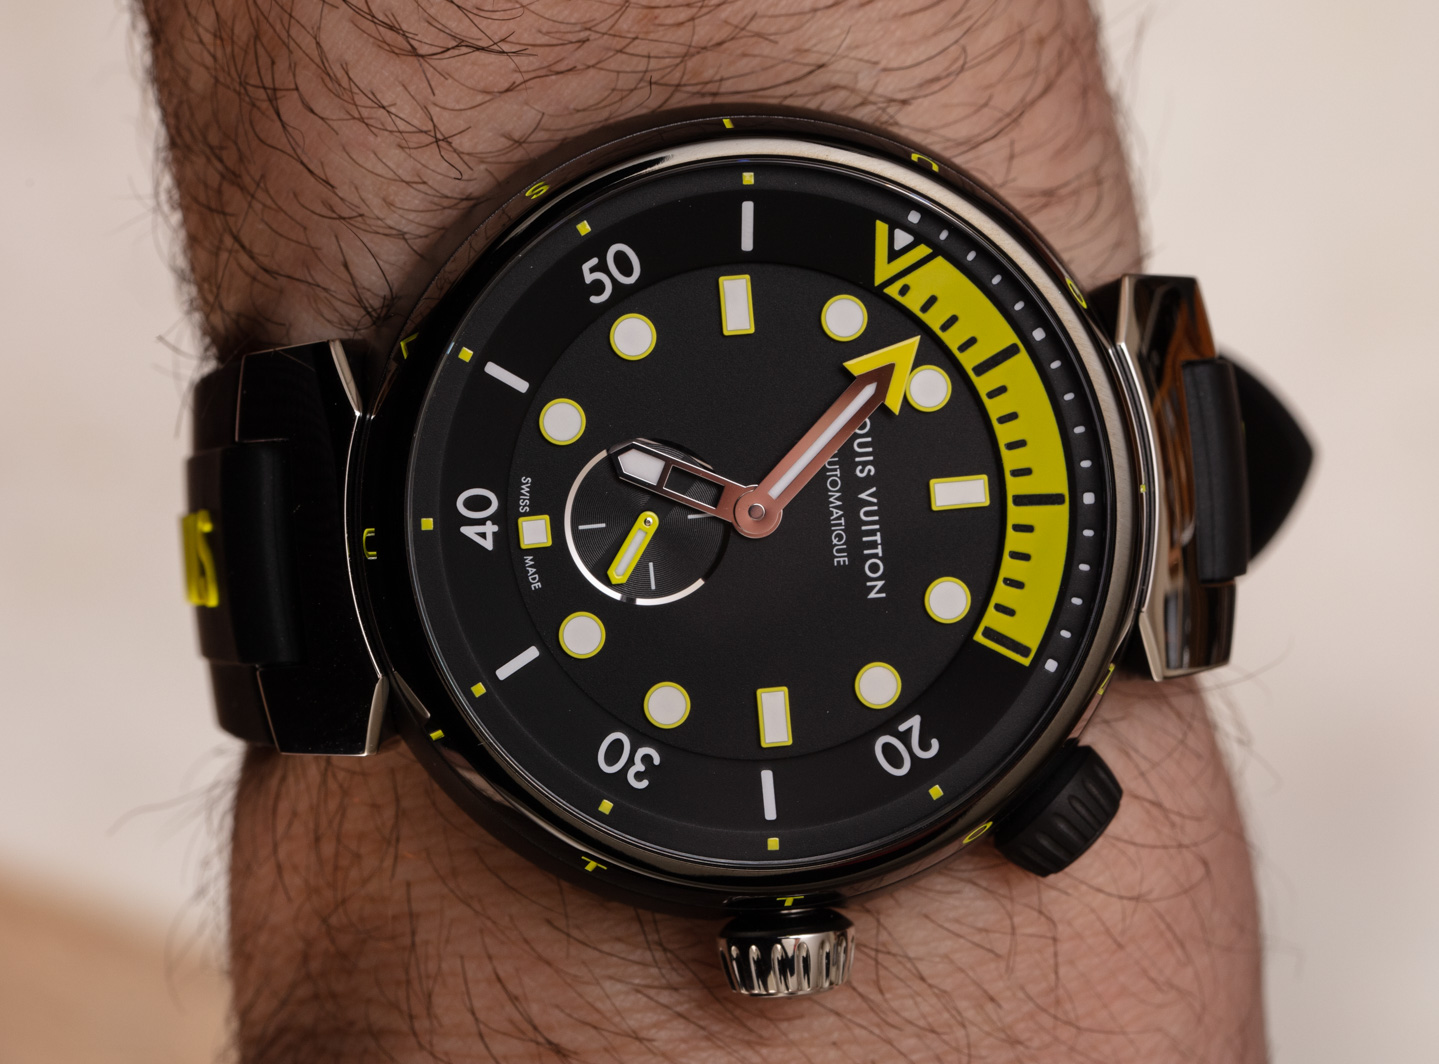 Louis Vuitton reimagines the traditional dive watch design with the new  Tambour Street Diver collection - Luxurylaunches